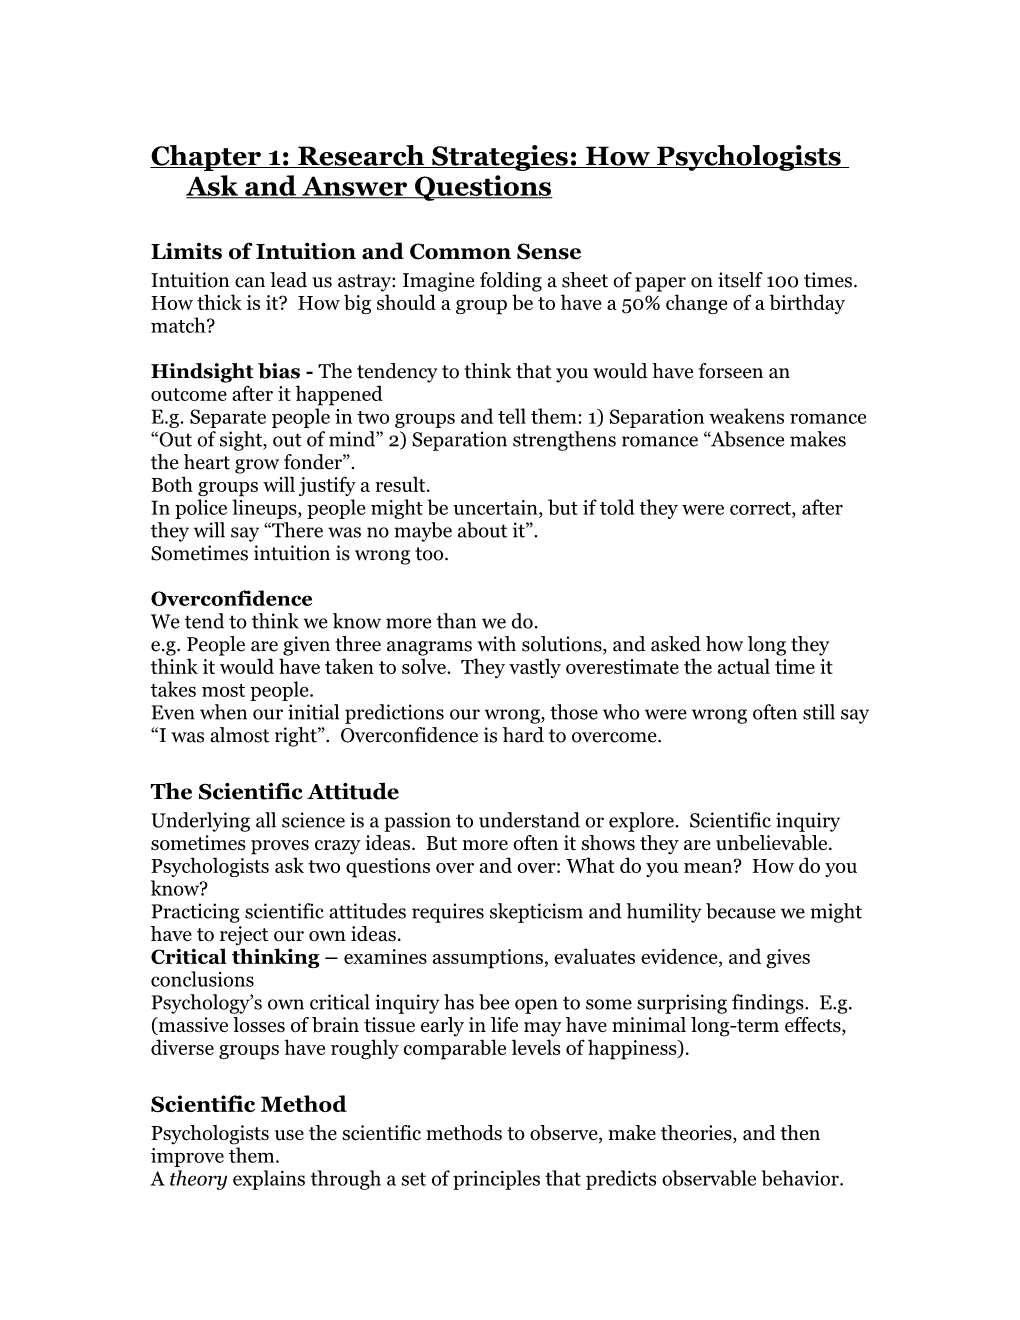 Chapter 1: Research Strategies: How Psychologists Ask and Answer Questions